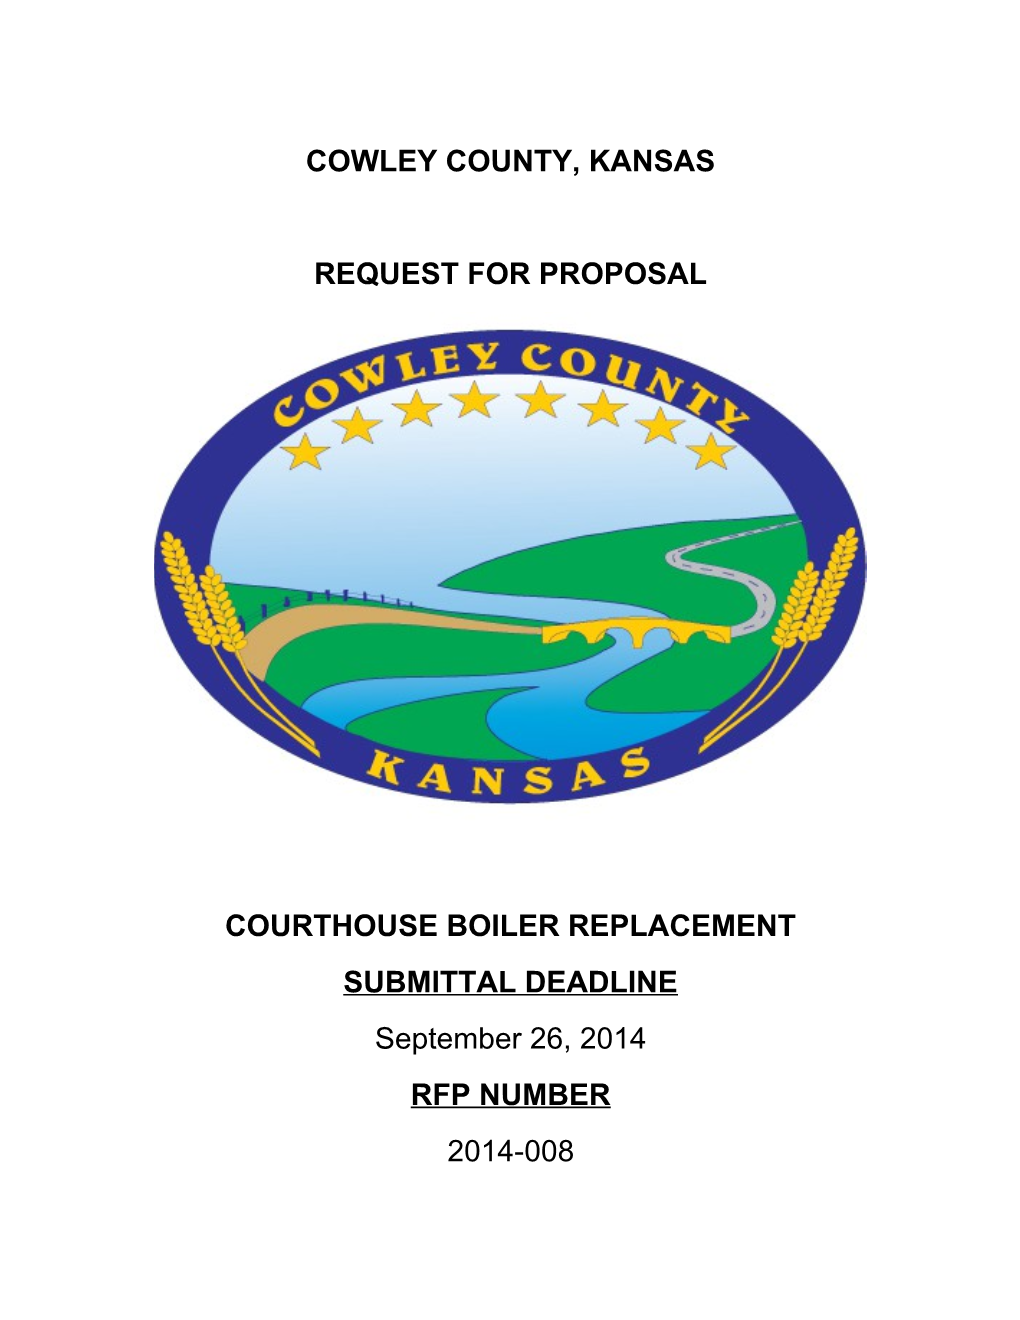 Cowley County, Kansas Request for Proposal 2014-008